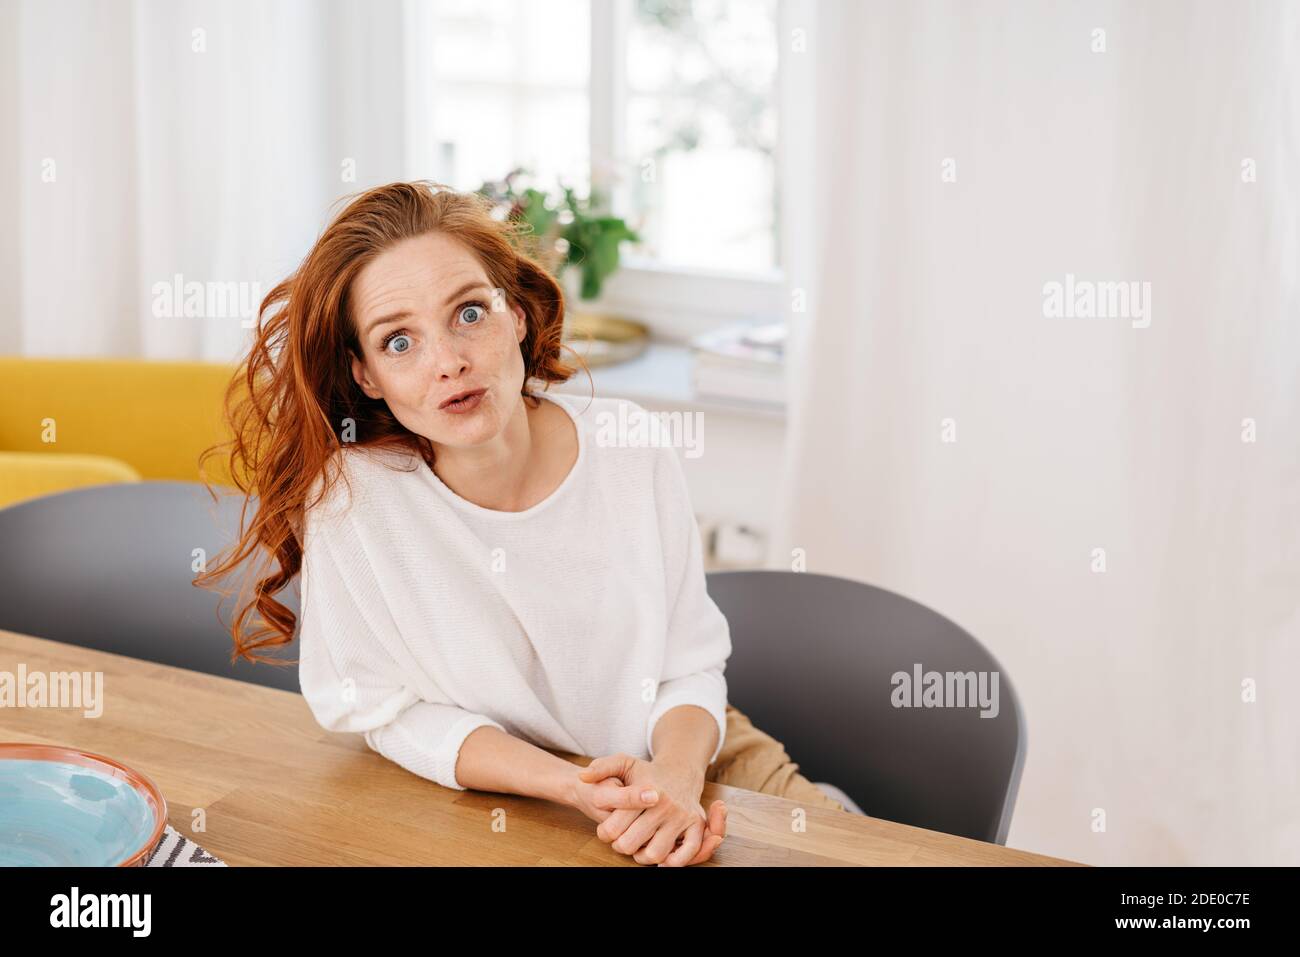 Shocked young woman staring wide eyed at the camera in disbelief or amazement as she relaxes sitting at a table at home with copyspace Stock Photo